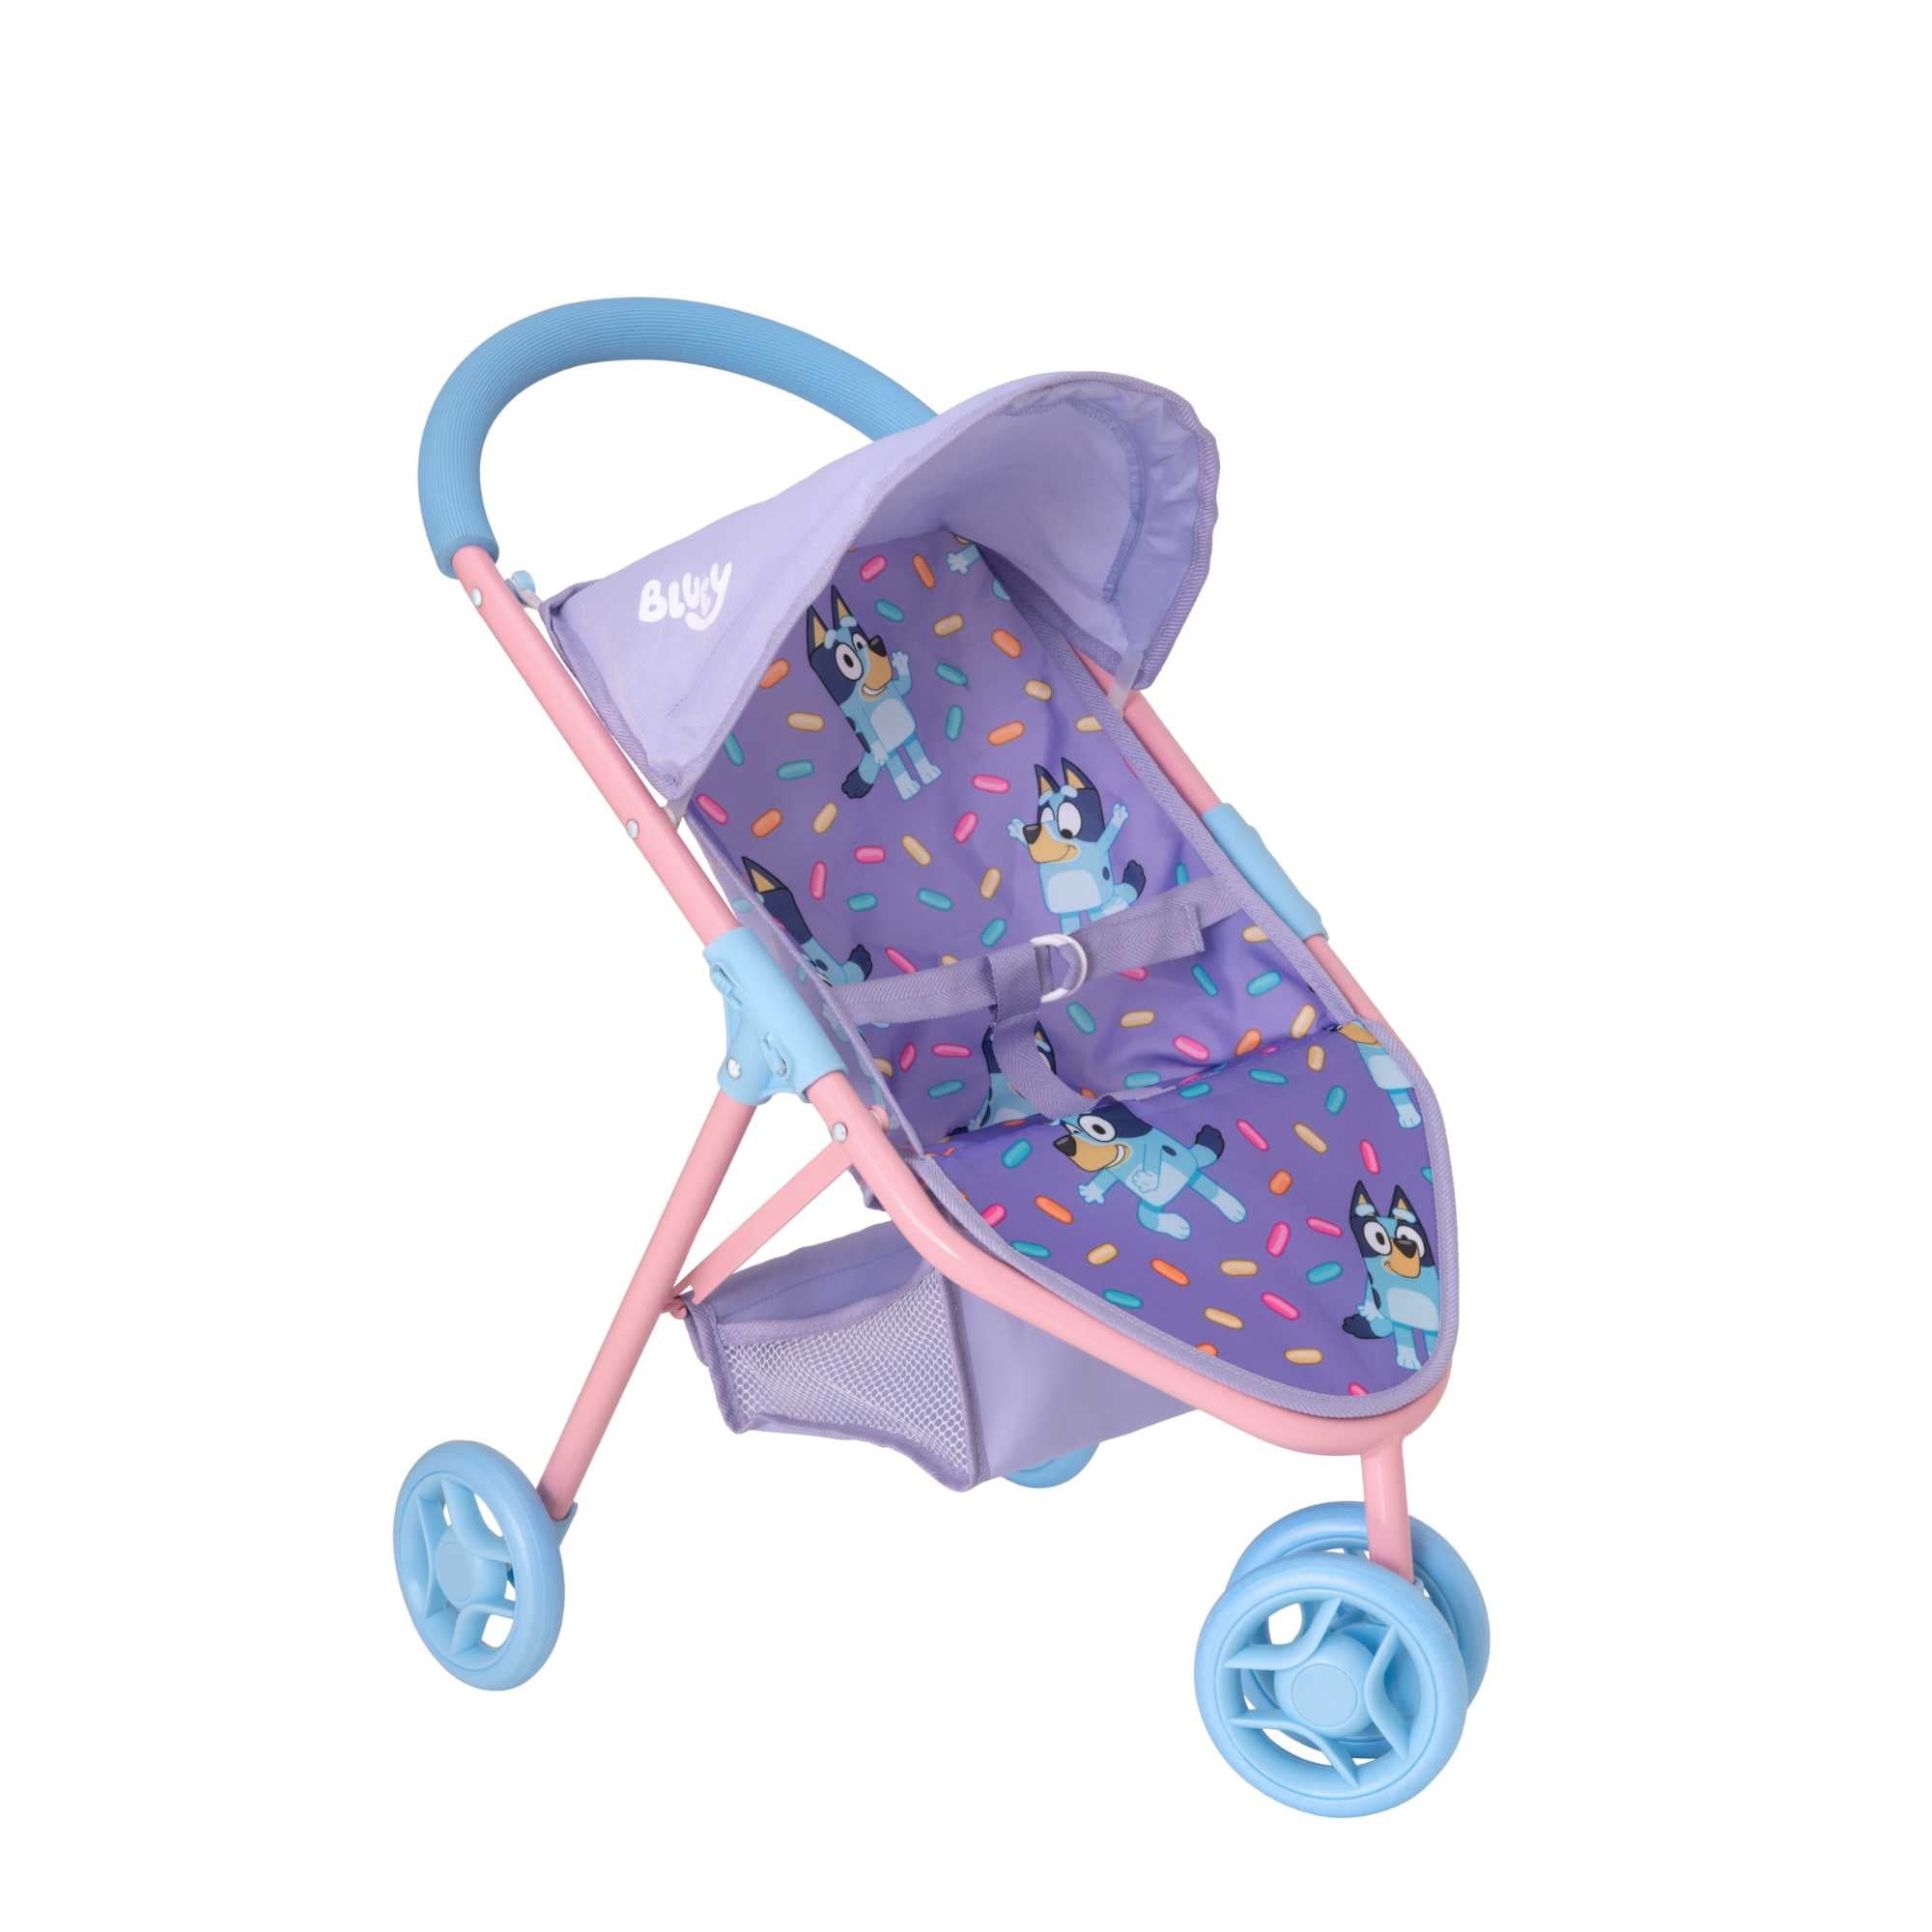 Bluey Jogger Dolls Pram - Sturdy and stylish pram designed for dolls, inspired by Bluey, perfect for active play and imaginative adventures.